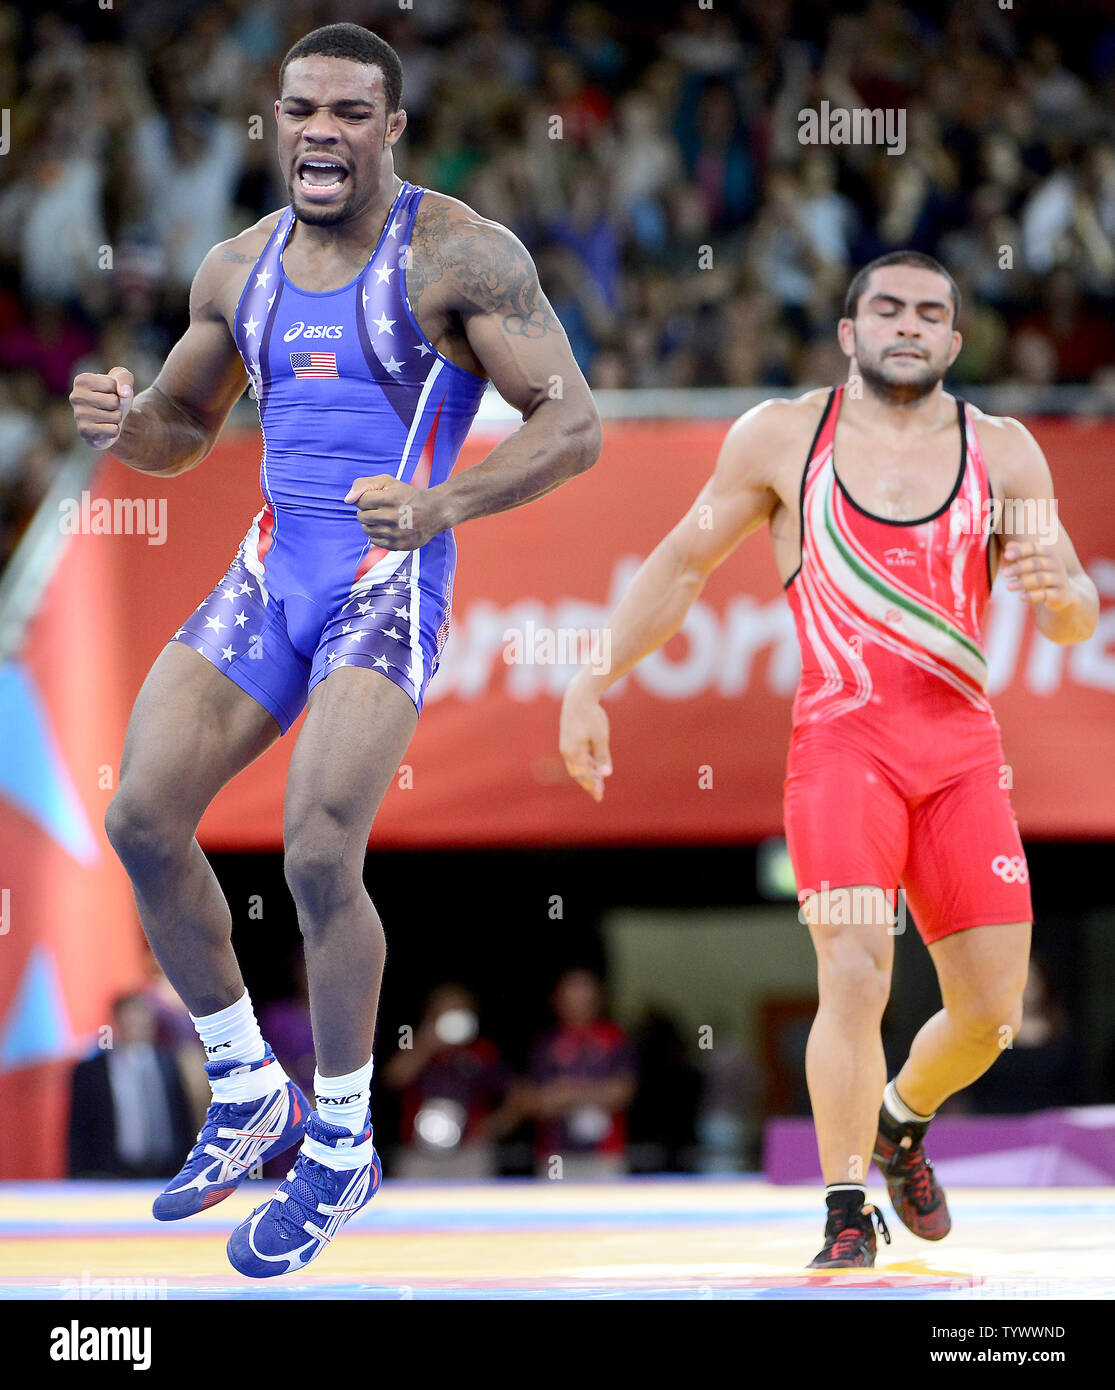 Jordan Ernest Burroughs of the United States of America, left, celebrates after winning the Gold Medal in the Men's 74kg Freestyle Wrestling against Sadegh Saeed Goudarzi of Iran, right, at the London 2012 Summer Olympics on August 10, 2012 in London. UPI/Ron Sachs Stock Photo